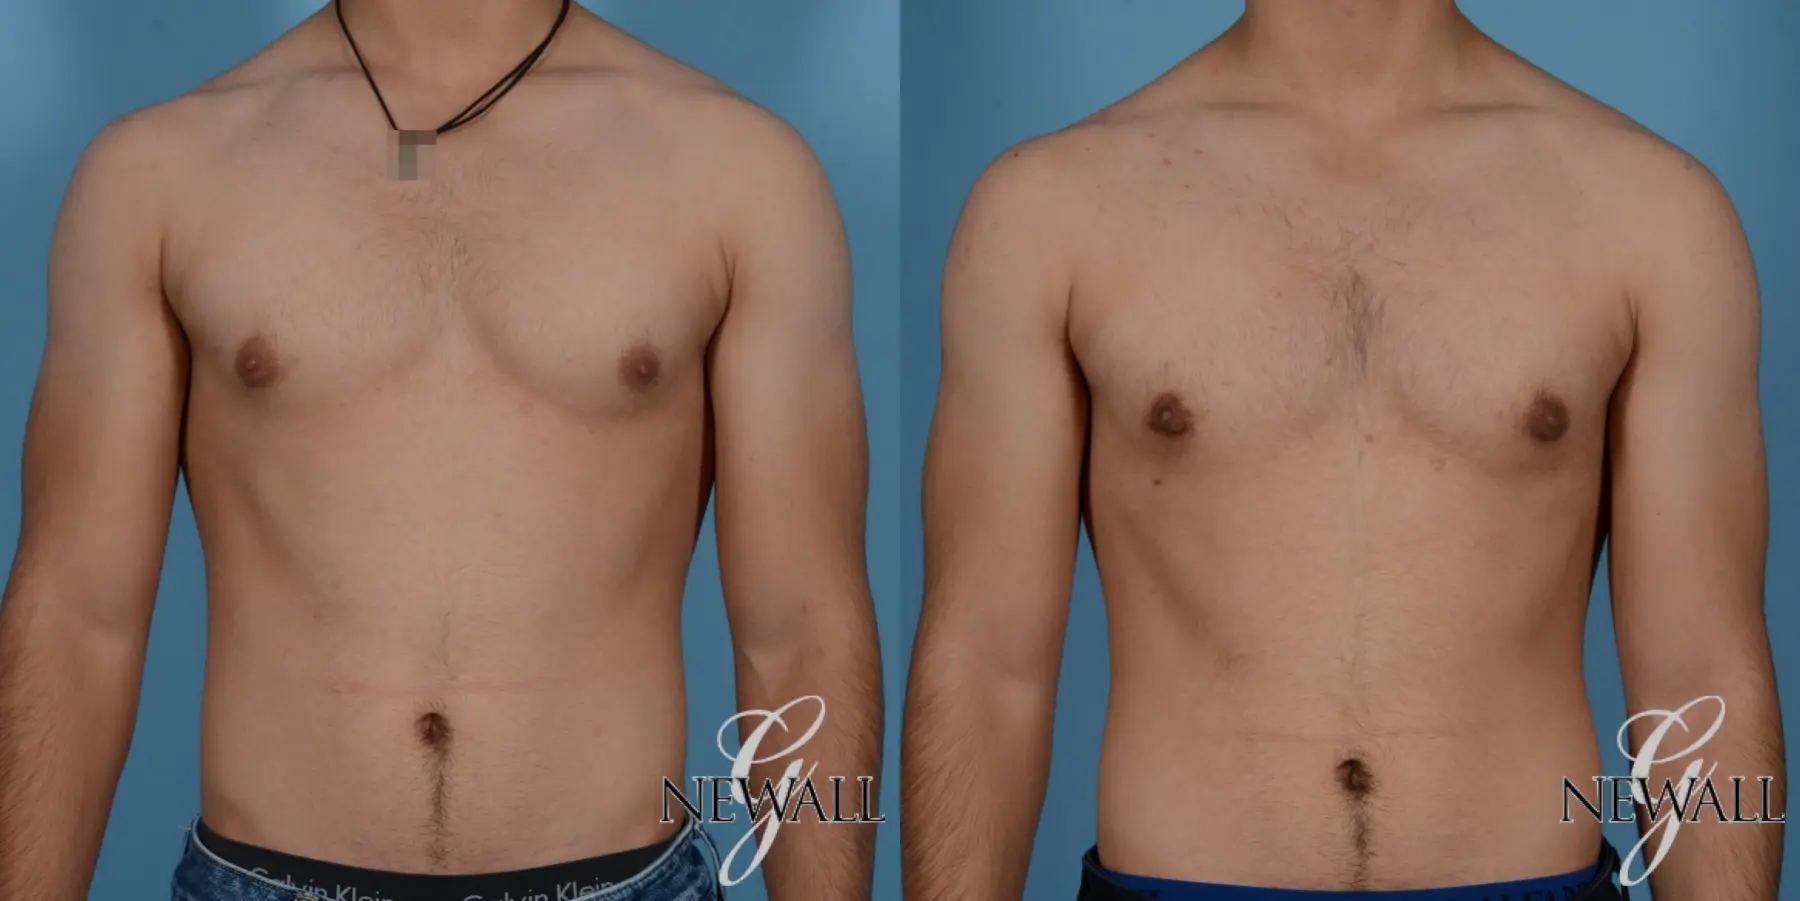 Gynecomastia: Patient 1 - Before and After  